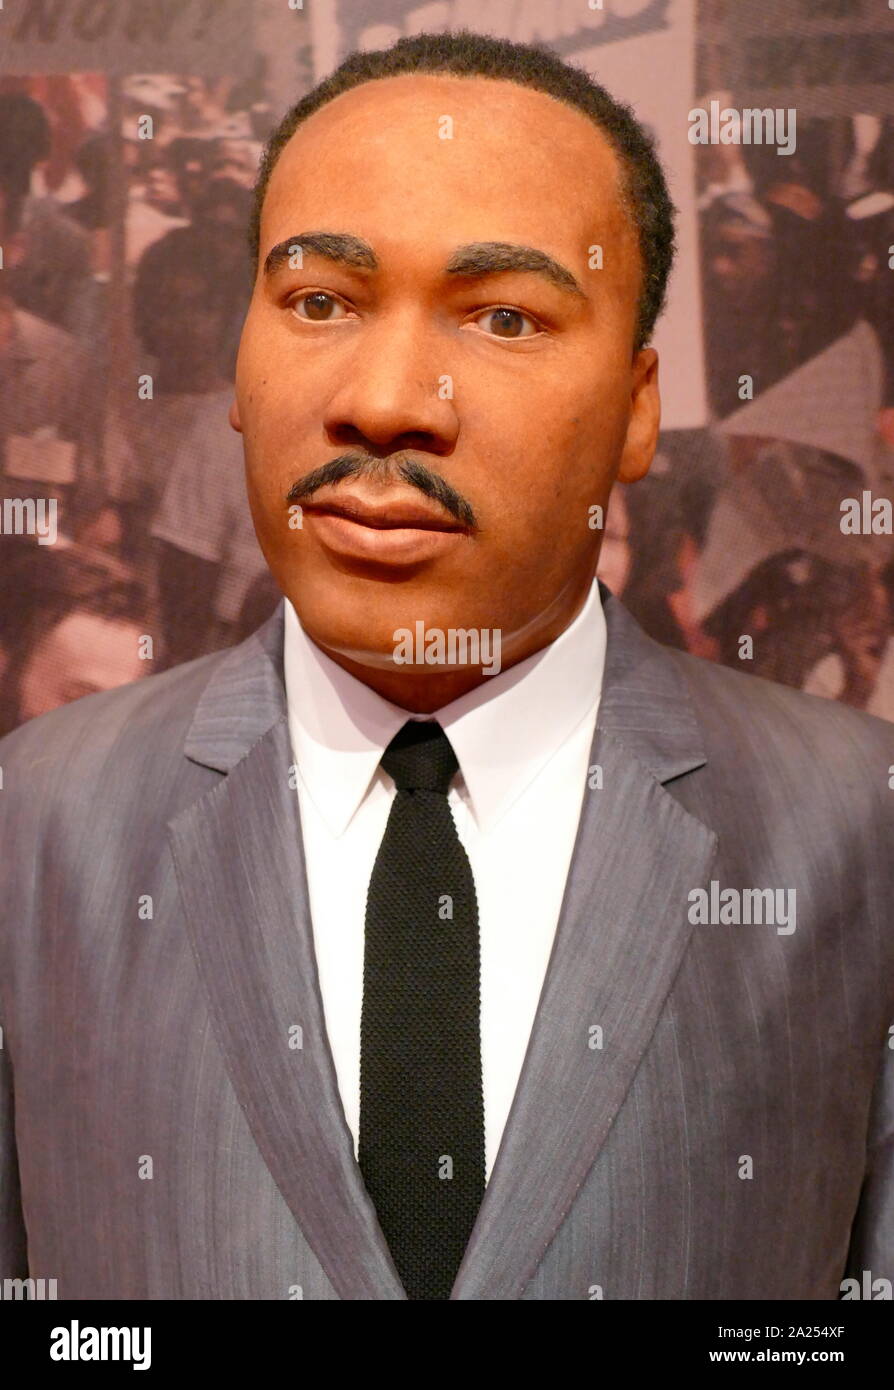 Waxwork statue depicting Martin Luther King Jr. (1929 - 1968), American Baptist minister and activist who became the most visible spokesperson and leader in the Civil Rights Movement Stock Photo